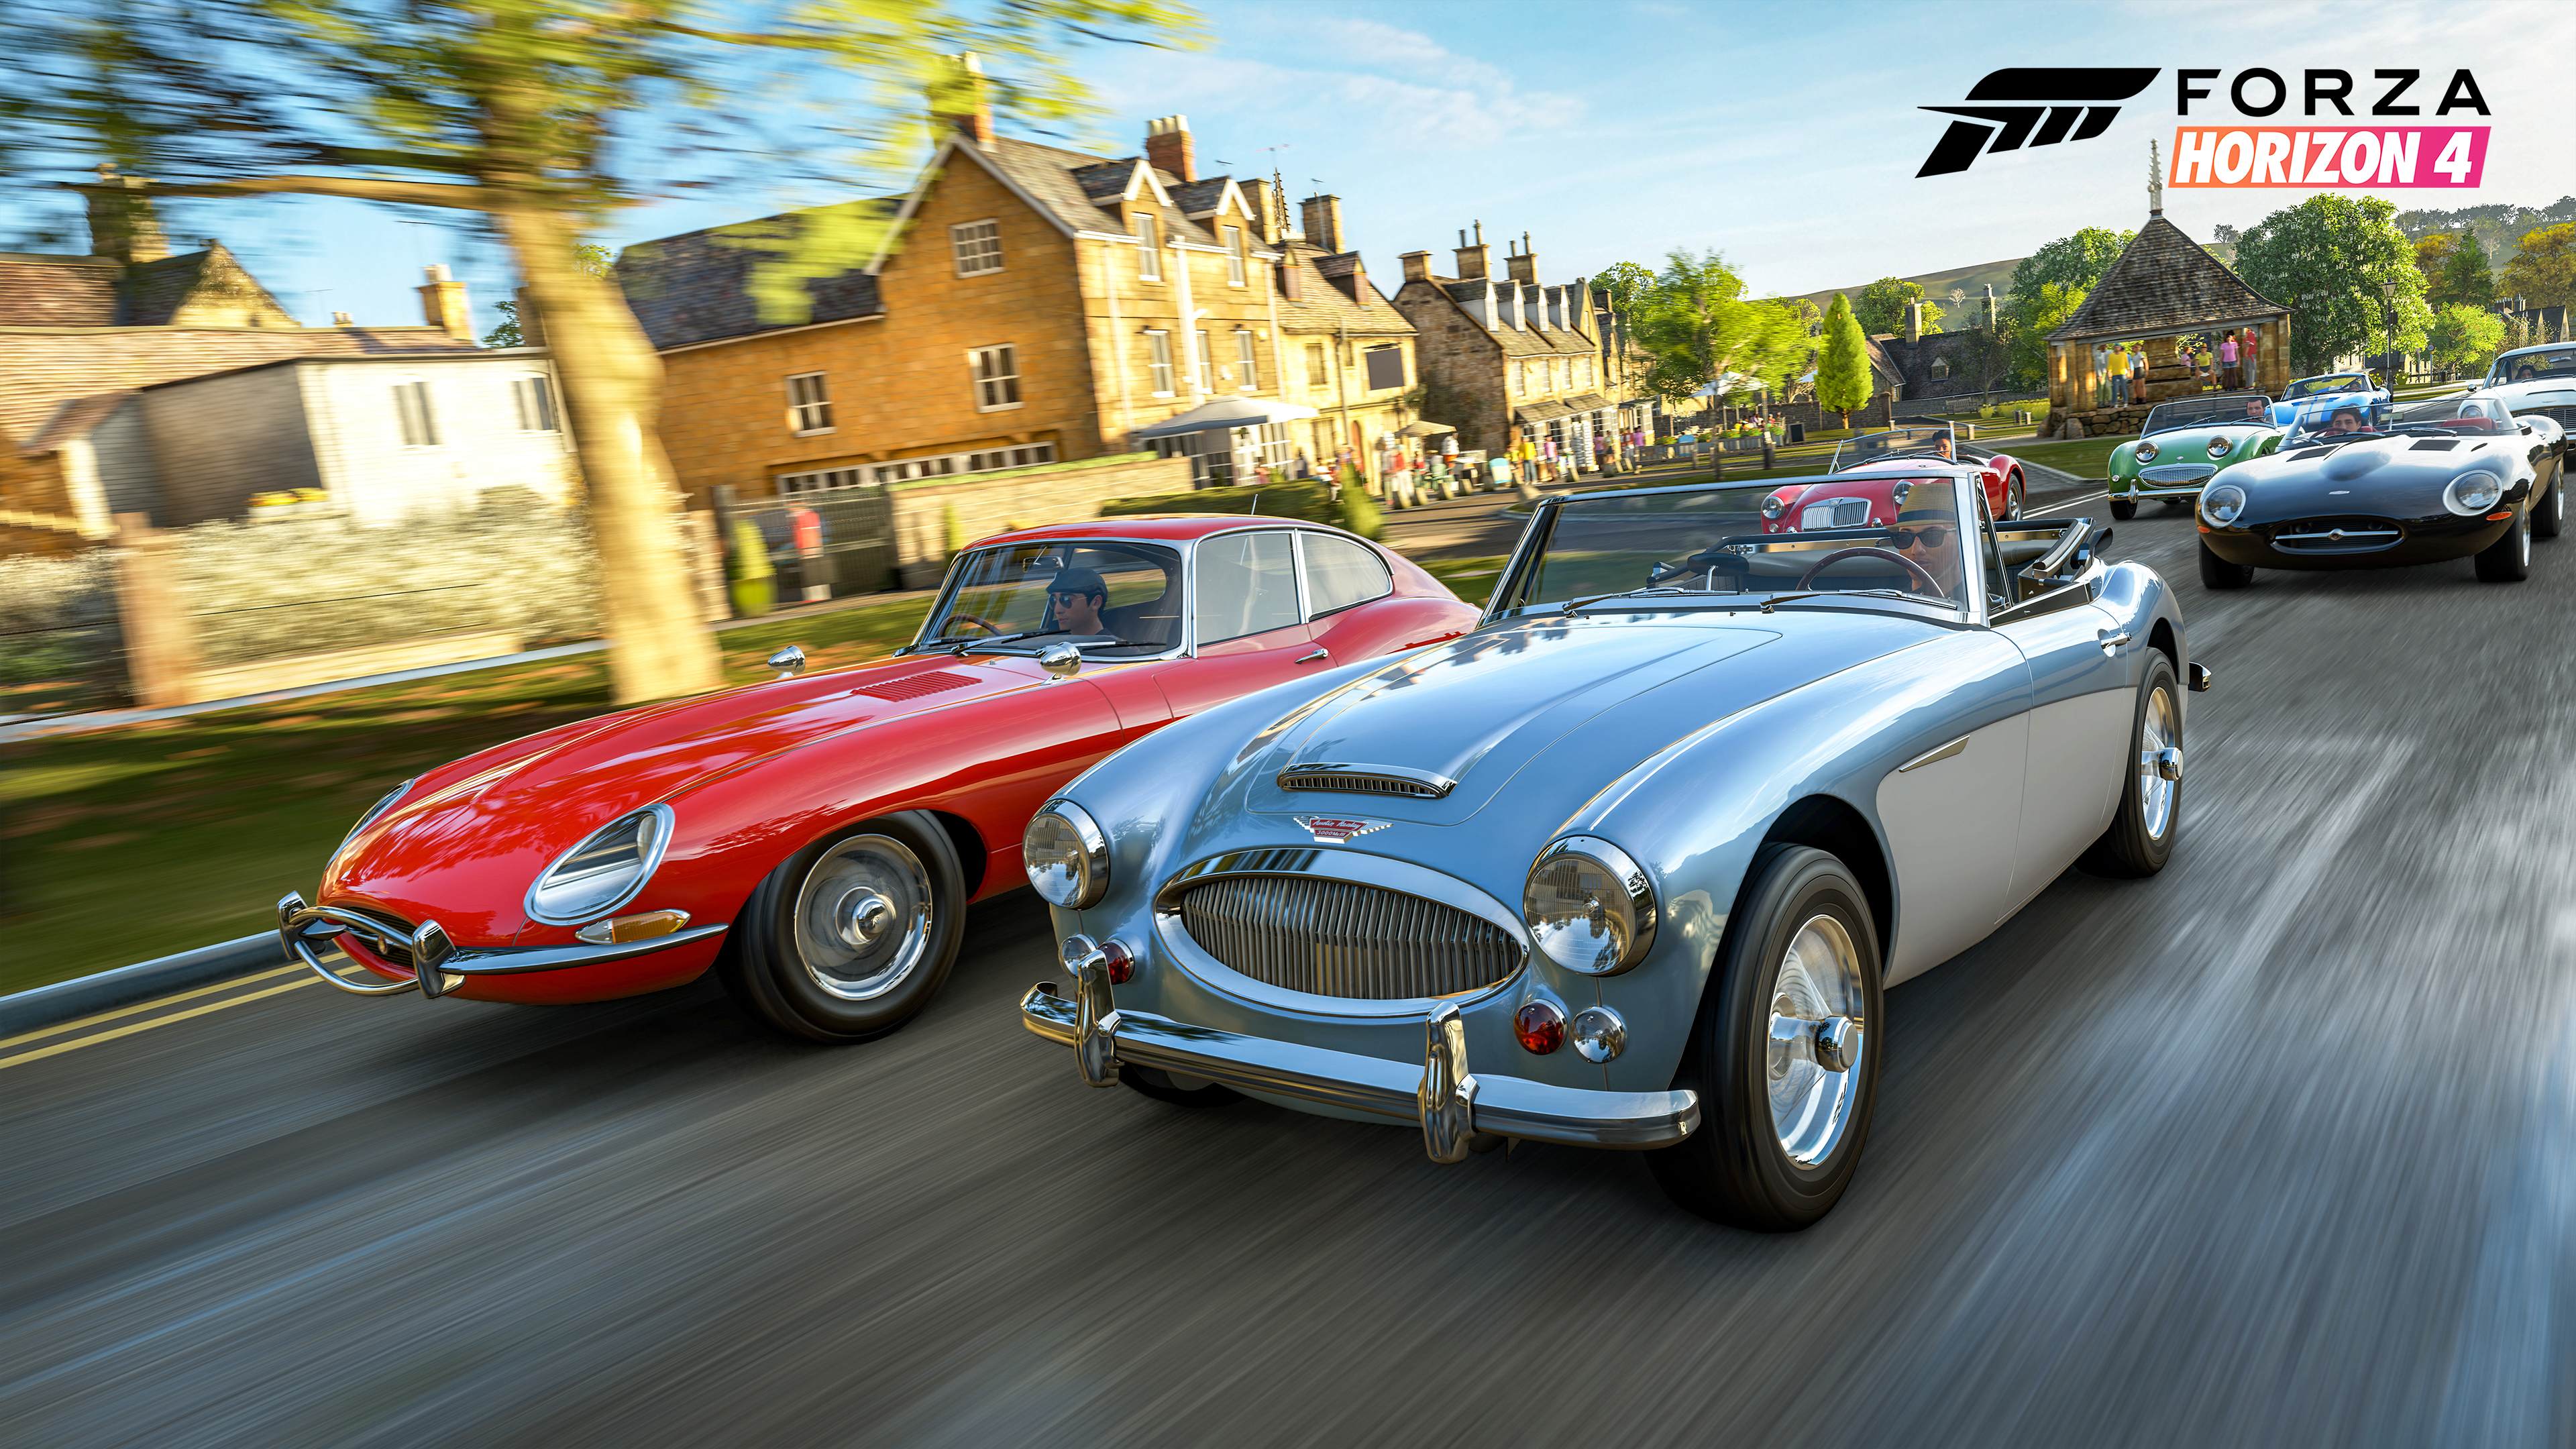 General 3840x2160 Forza Horizon 4 video games Forza racing oldtimers red cars blue cars vehicle car logo road